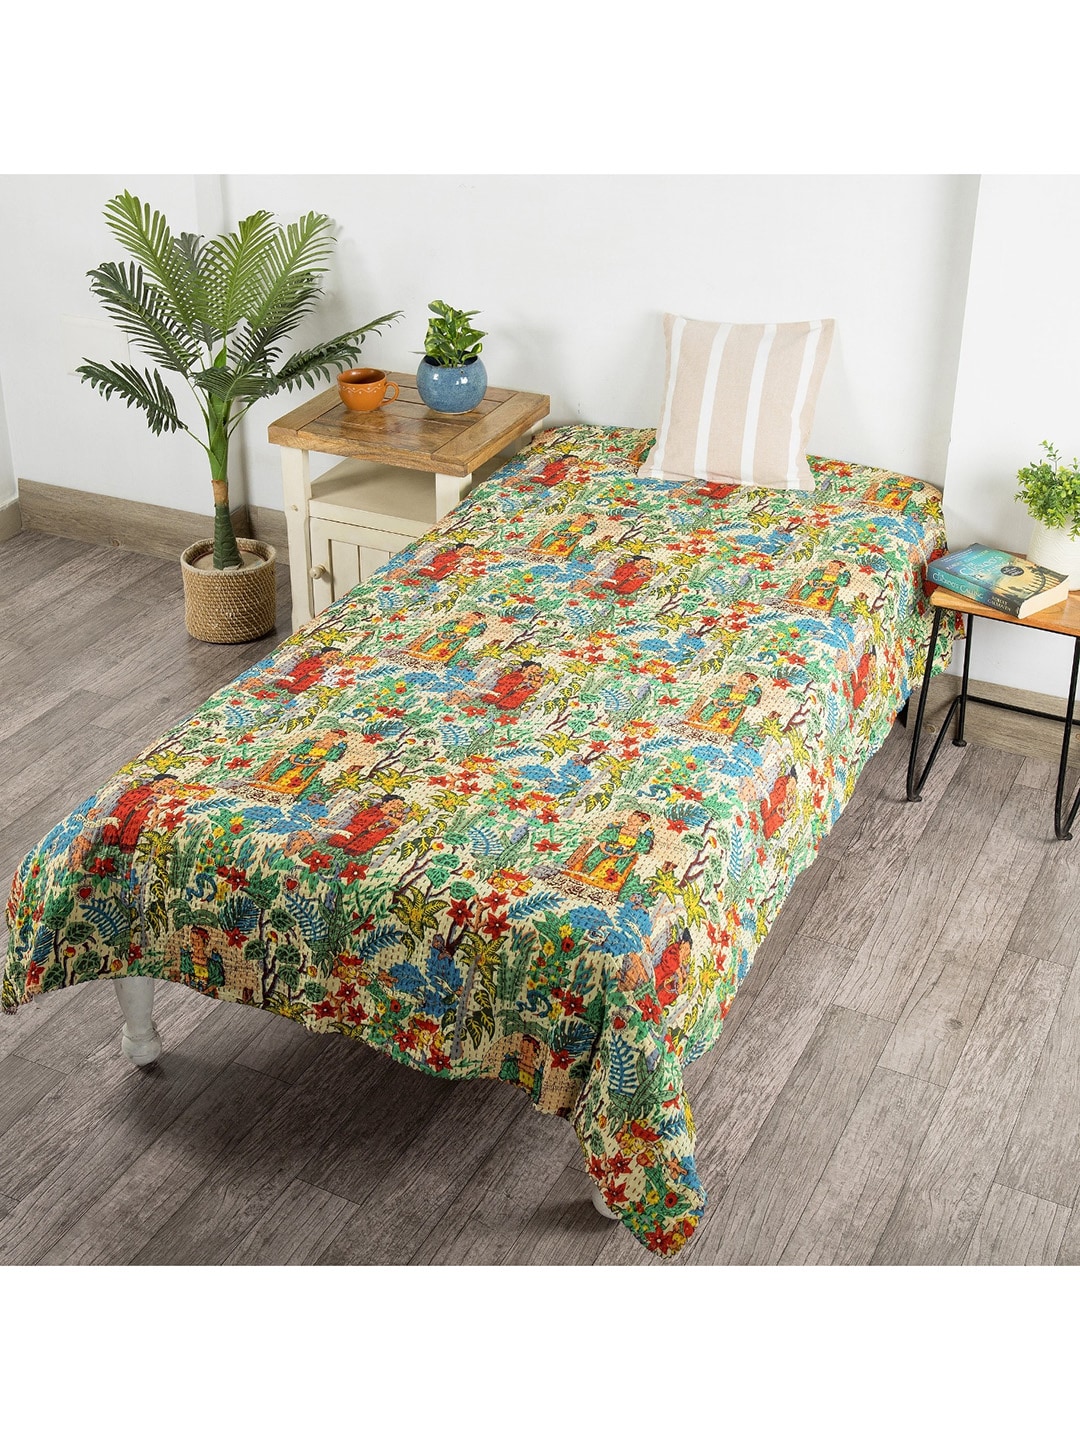 HANDICRAFT PALACE Beige & Green Printed Kantha Work Quilted Cotton Single Bed Cover Price in India